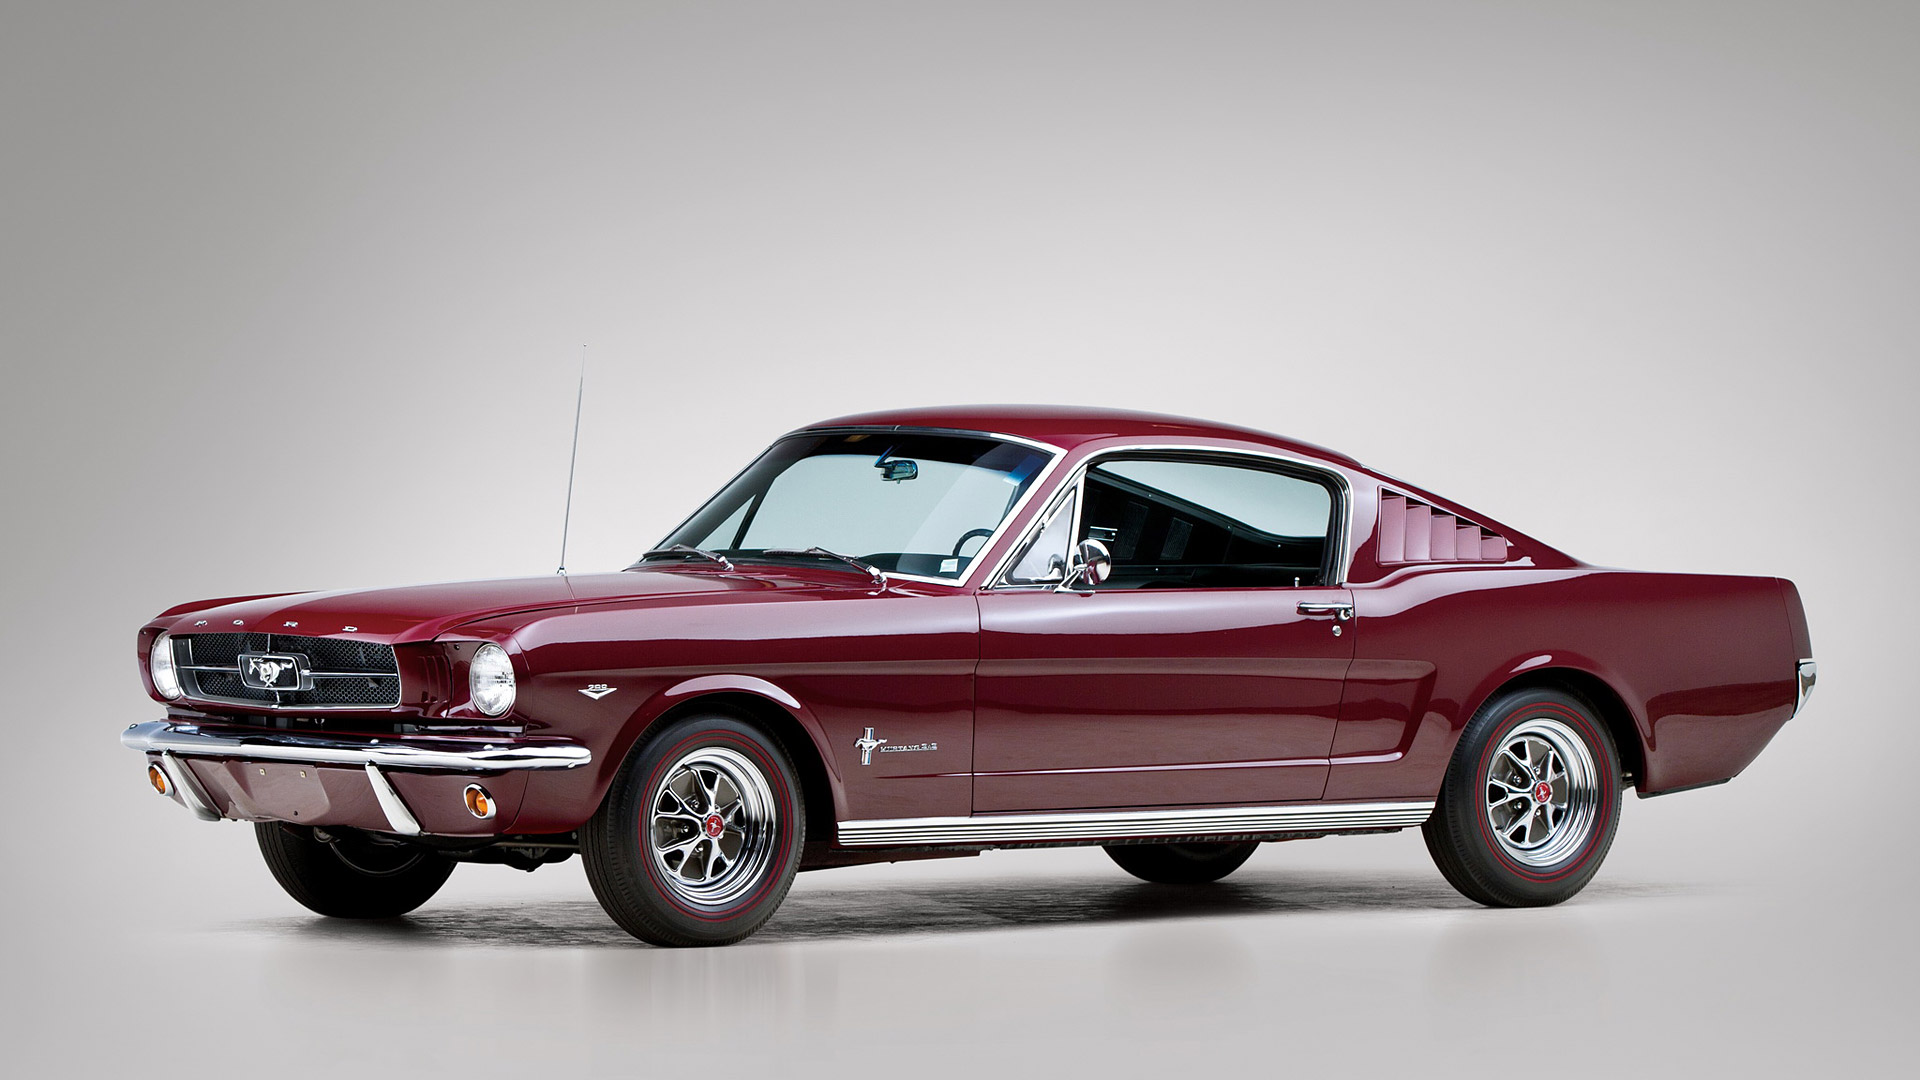 Ford Mustang Fastback Wallpaper HD Image Wsupercars